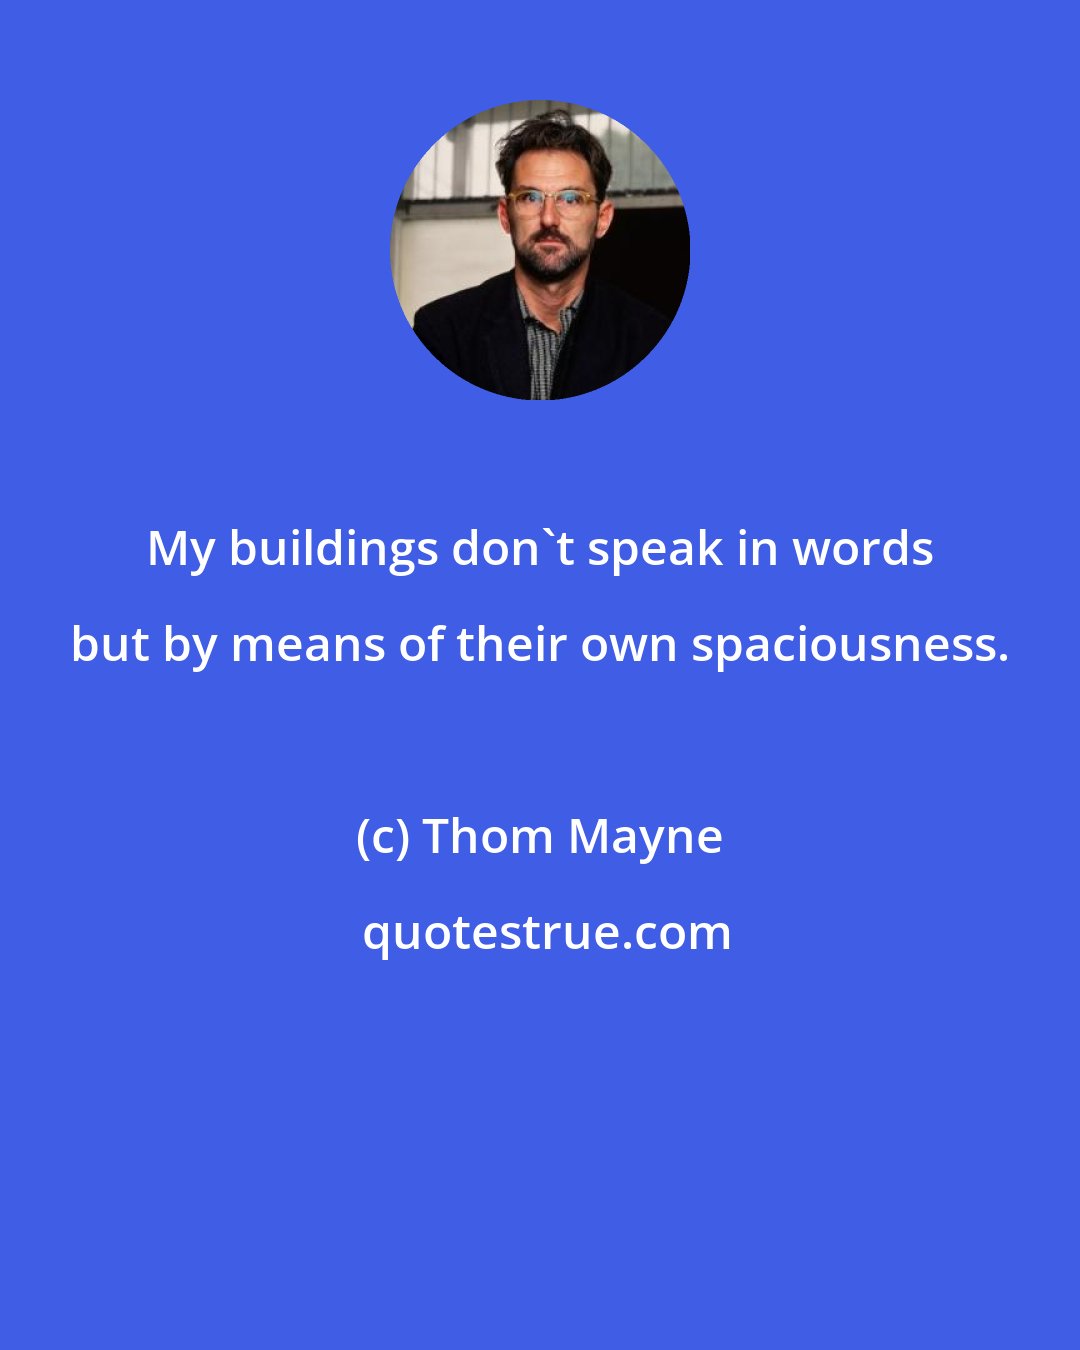 Thom Mayne: My buildings don't speak in words but by means of their own spaciousness.